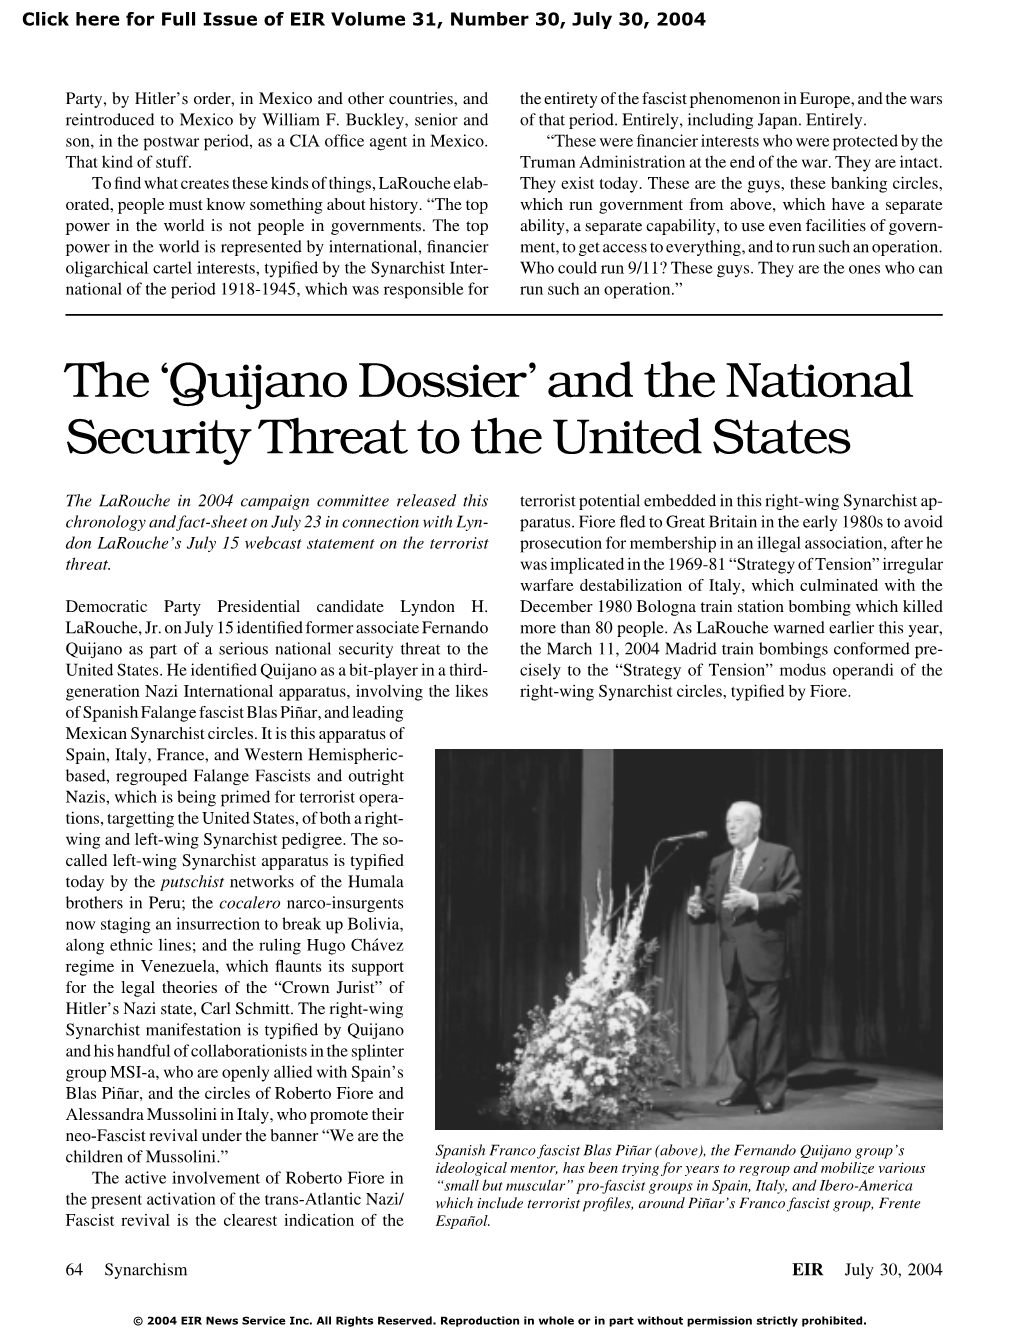 Quijano Dossier’ and the National Security Threat to the United States